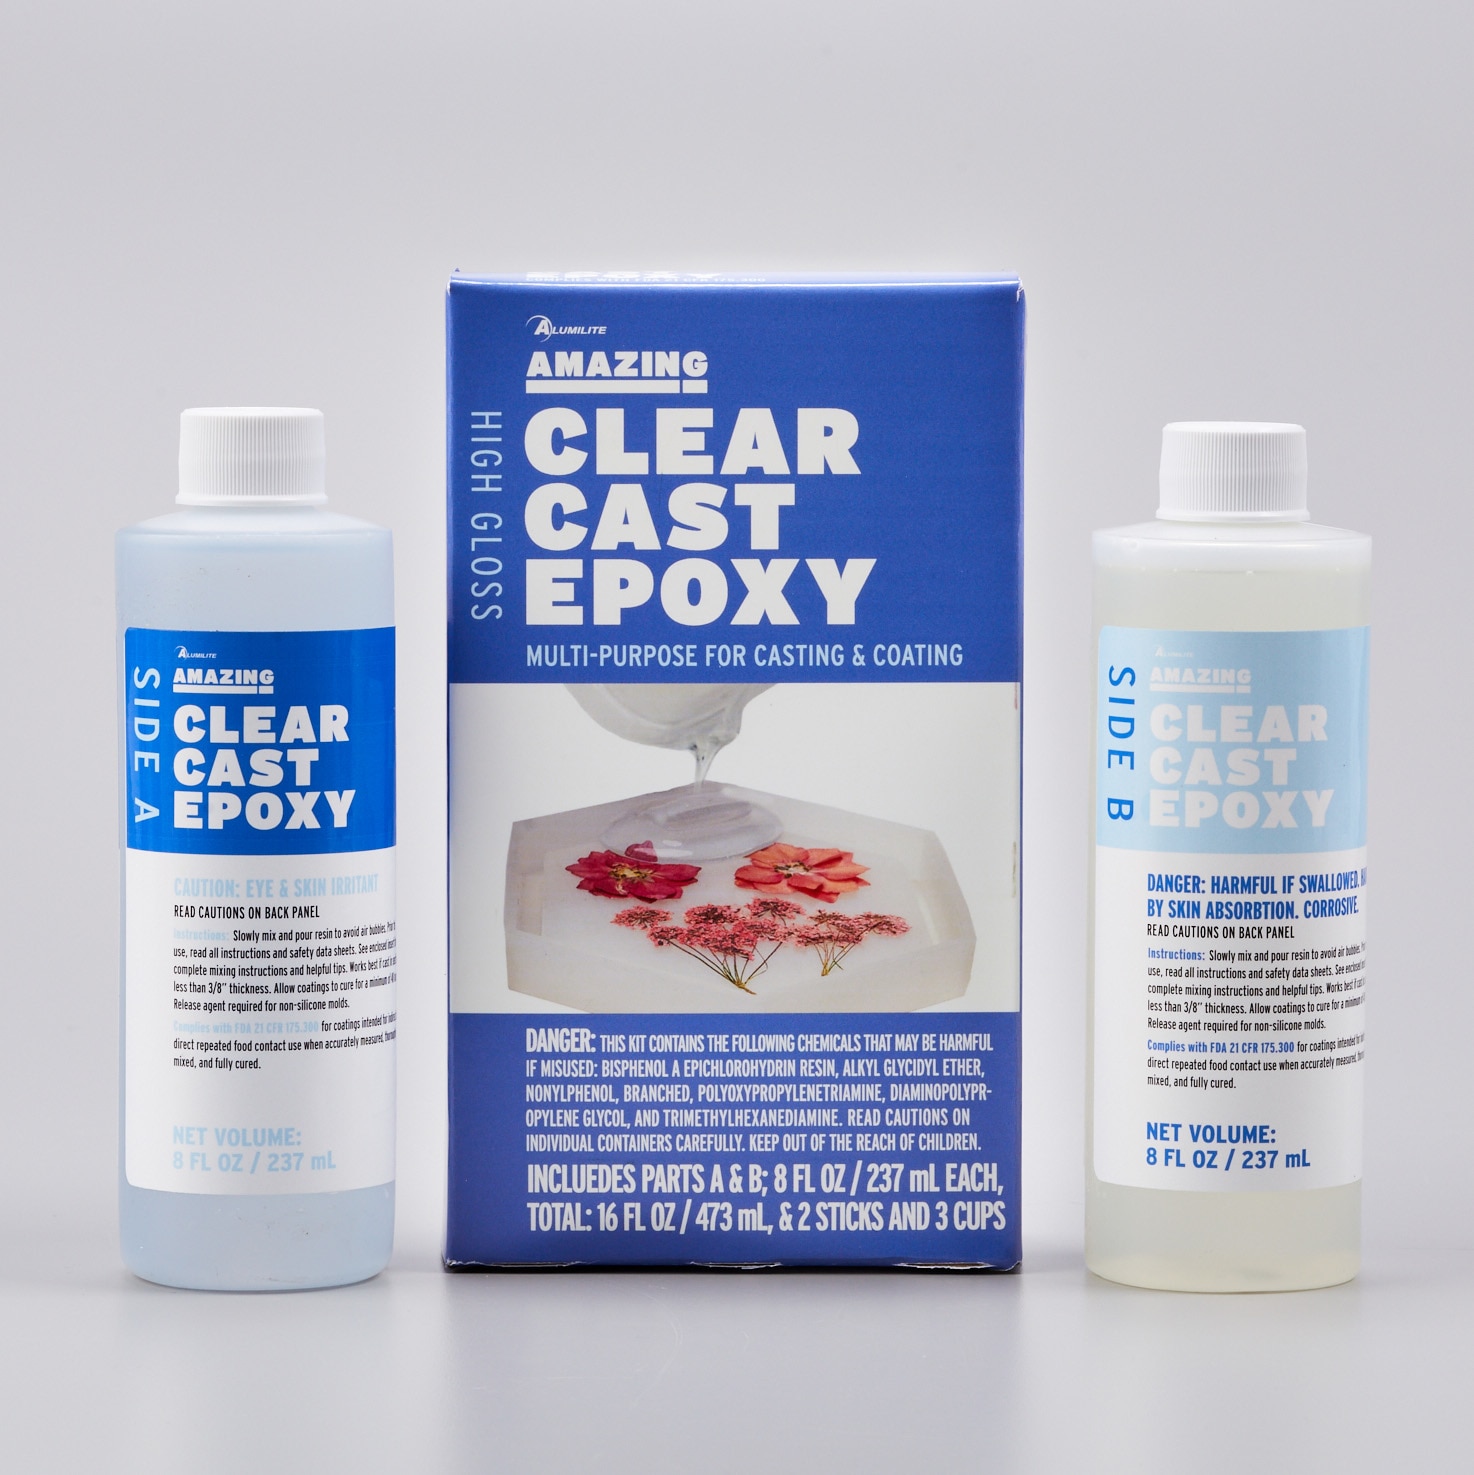 Alumilite Clear Epoxy Casting Compound - High Gloss, Durable Finish - 1:1  Mix Ratio - FDA Approved for Food Contact